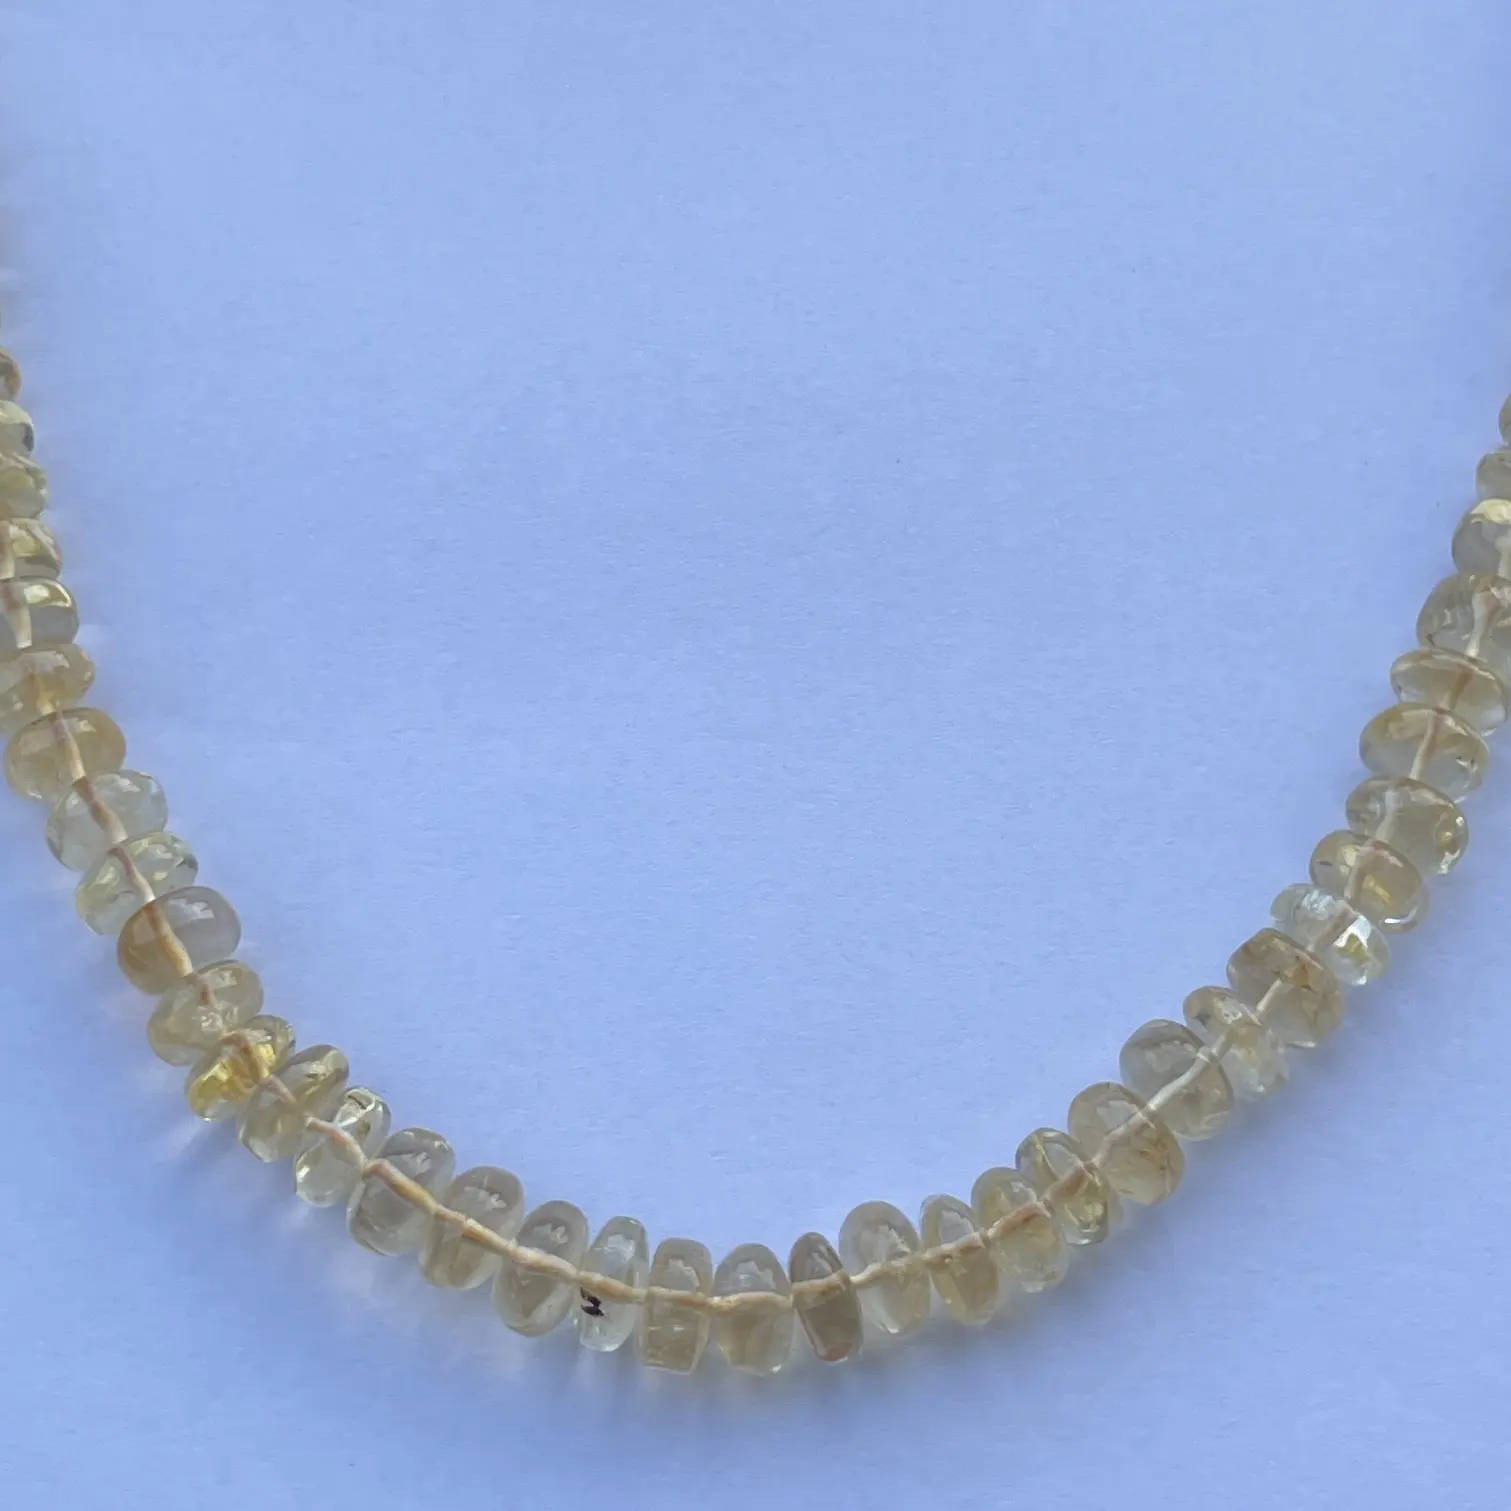 6mm 8mm 10mm 12mm Natural Yellow Orange Citrine Stone Smooth Rondelle Gemstone Beads Necklace Jewelry Factory Supplier Online